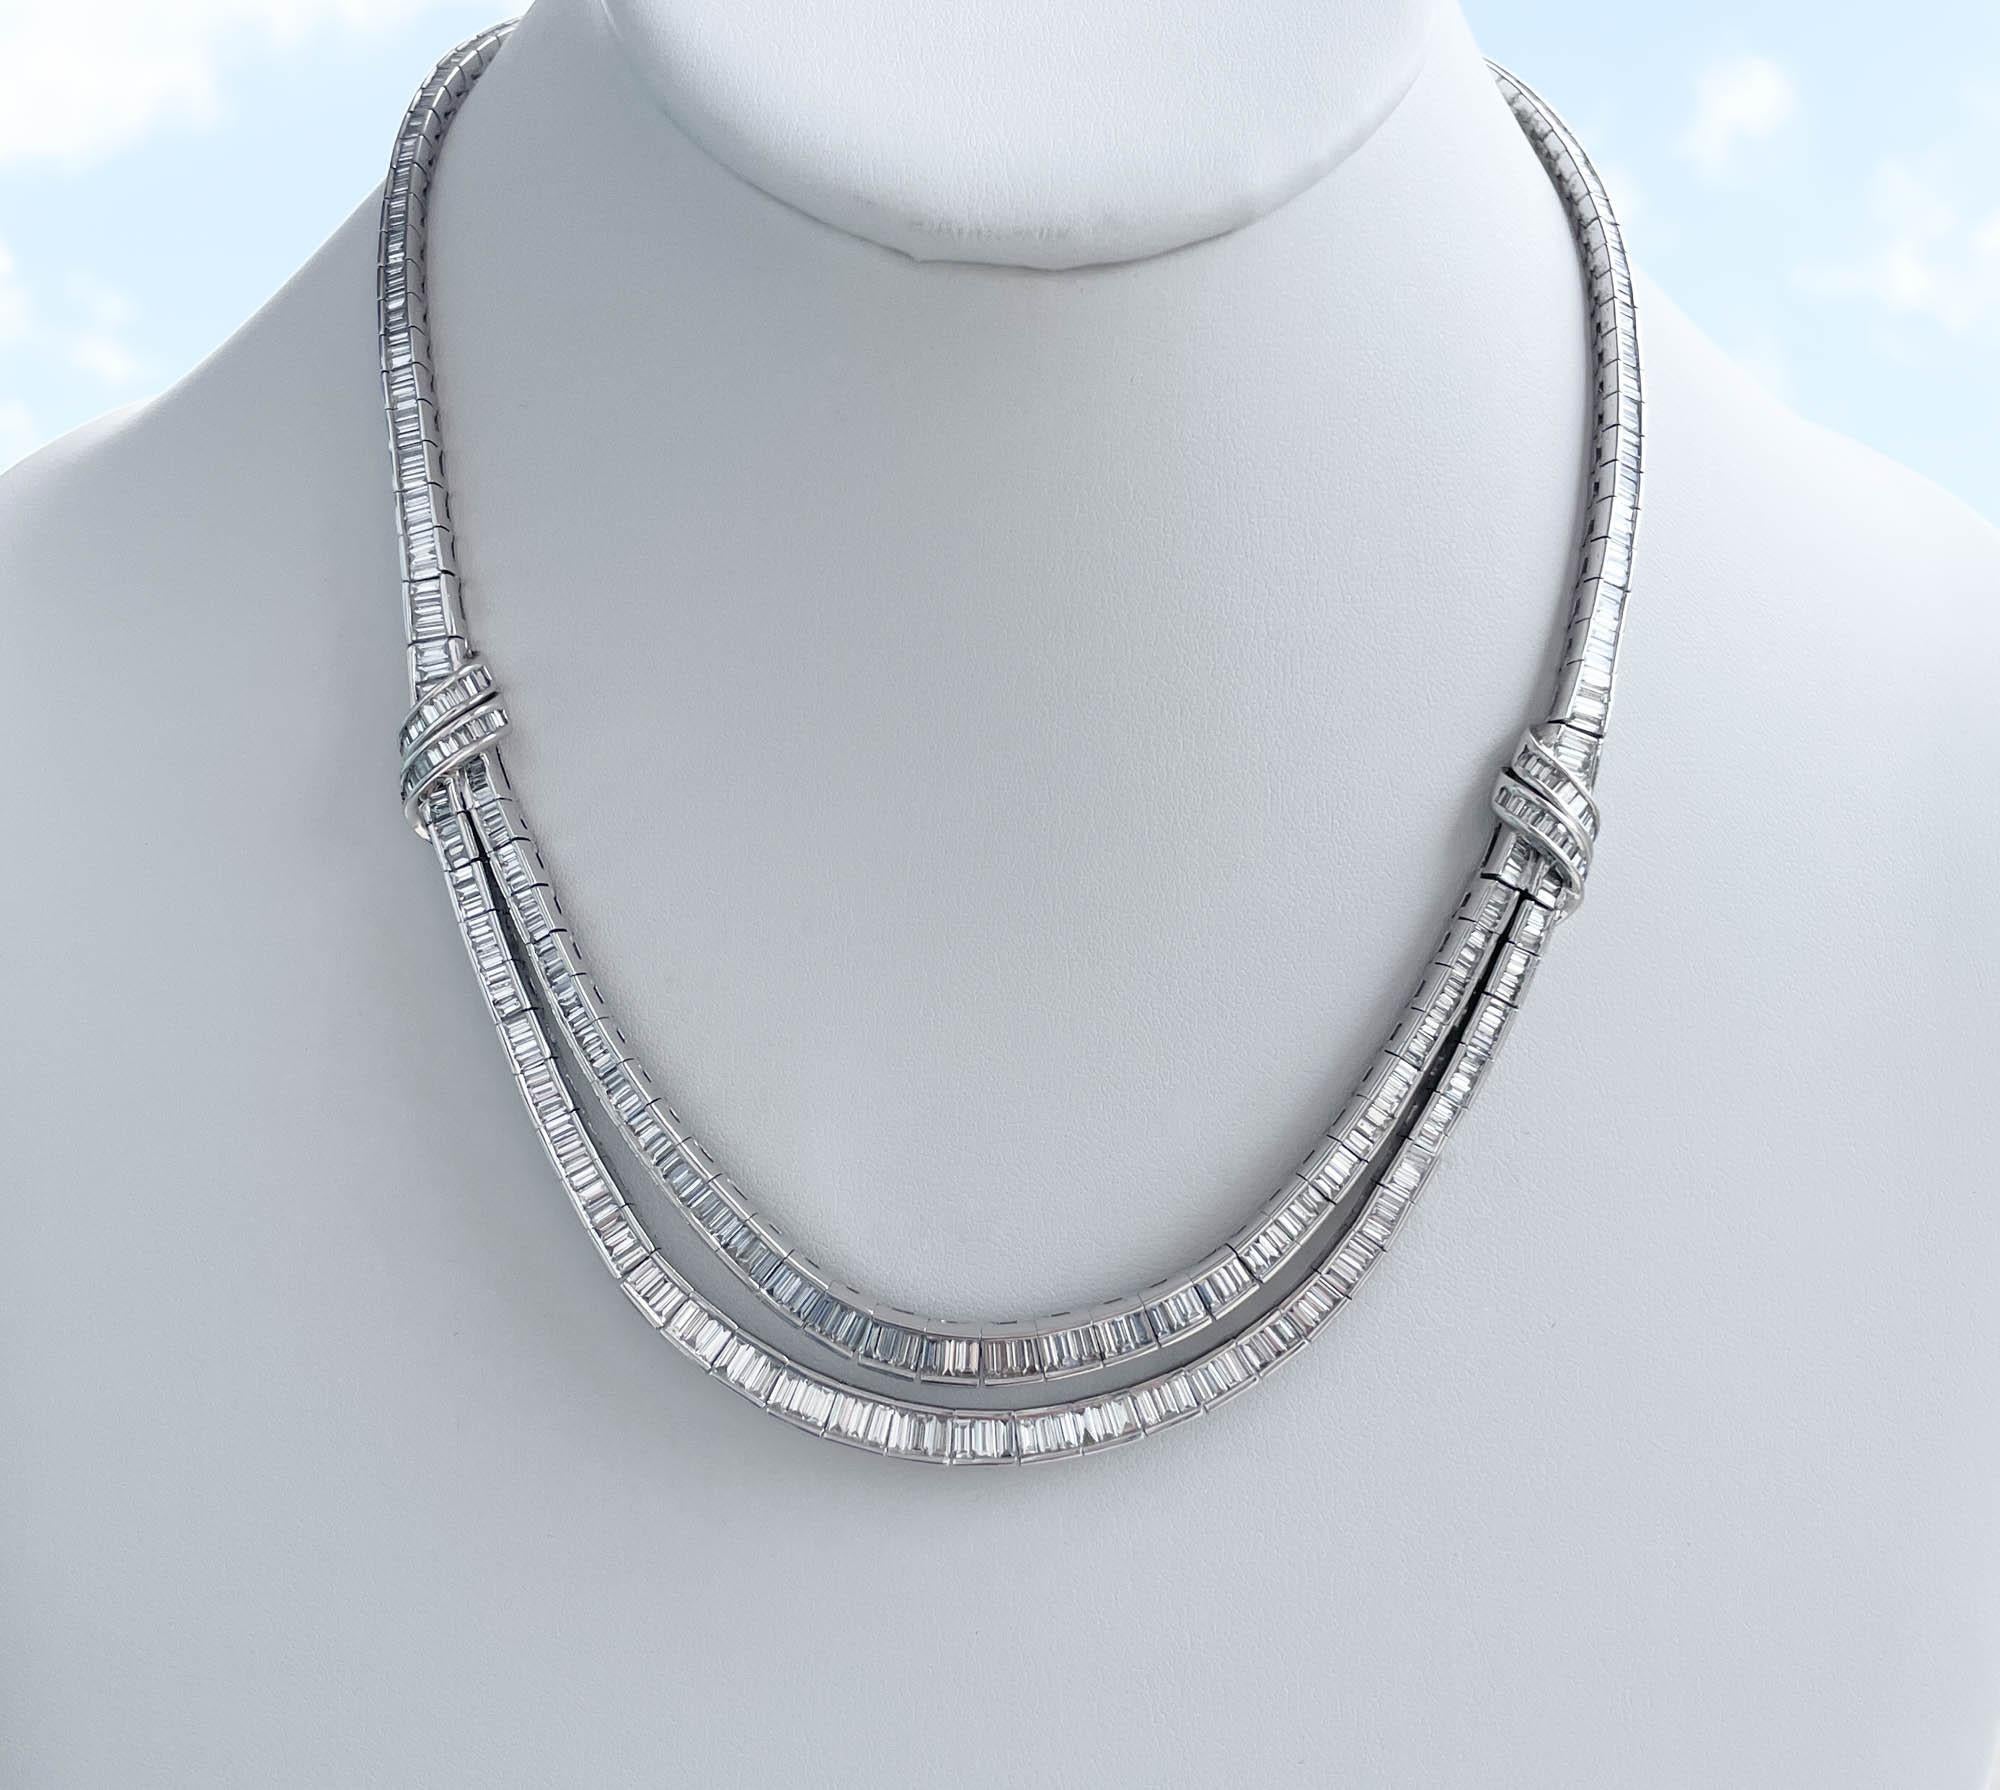 Jay Feder Platinum Diamond Collar Necklace
Set with baguette cut diamonds; estimated total weight is 16.35ctw.
The necklace is approx. 17 inches long. The total weight of the necklace is 84.8 grams.

Please view our photos and videos for more